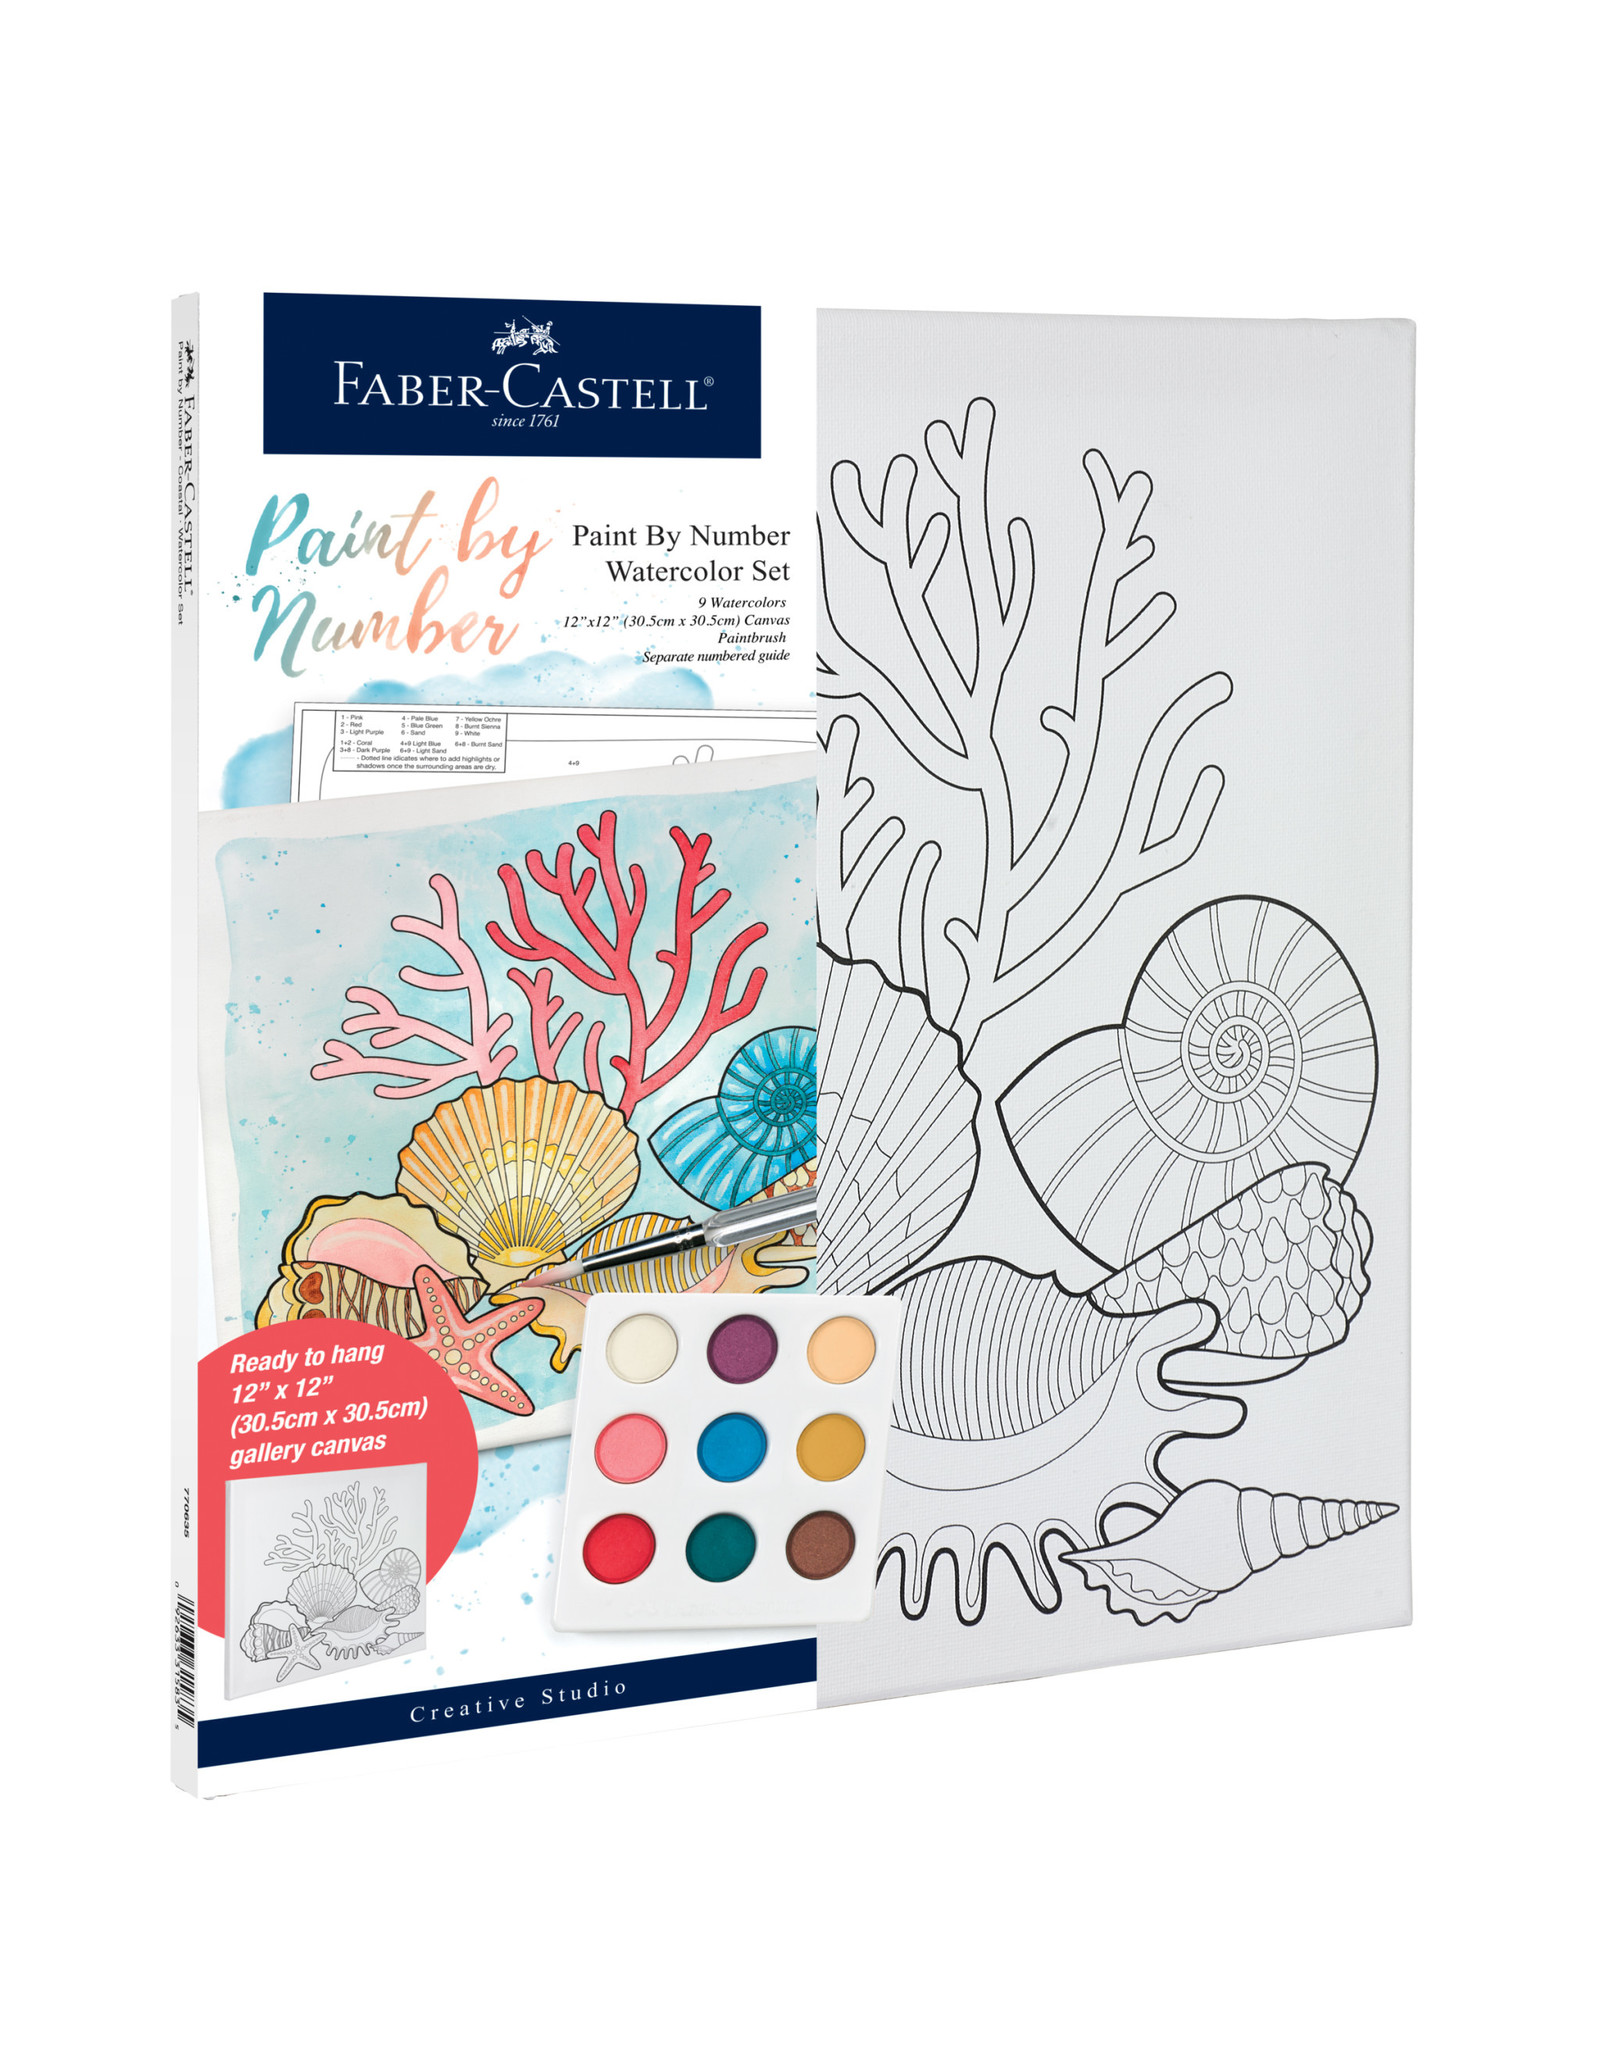 FABER-CASTELL Paint by Number, Coastal